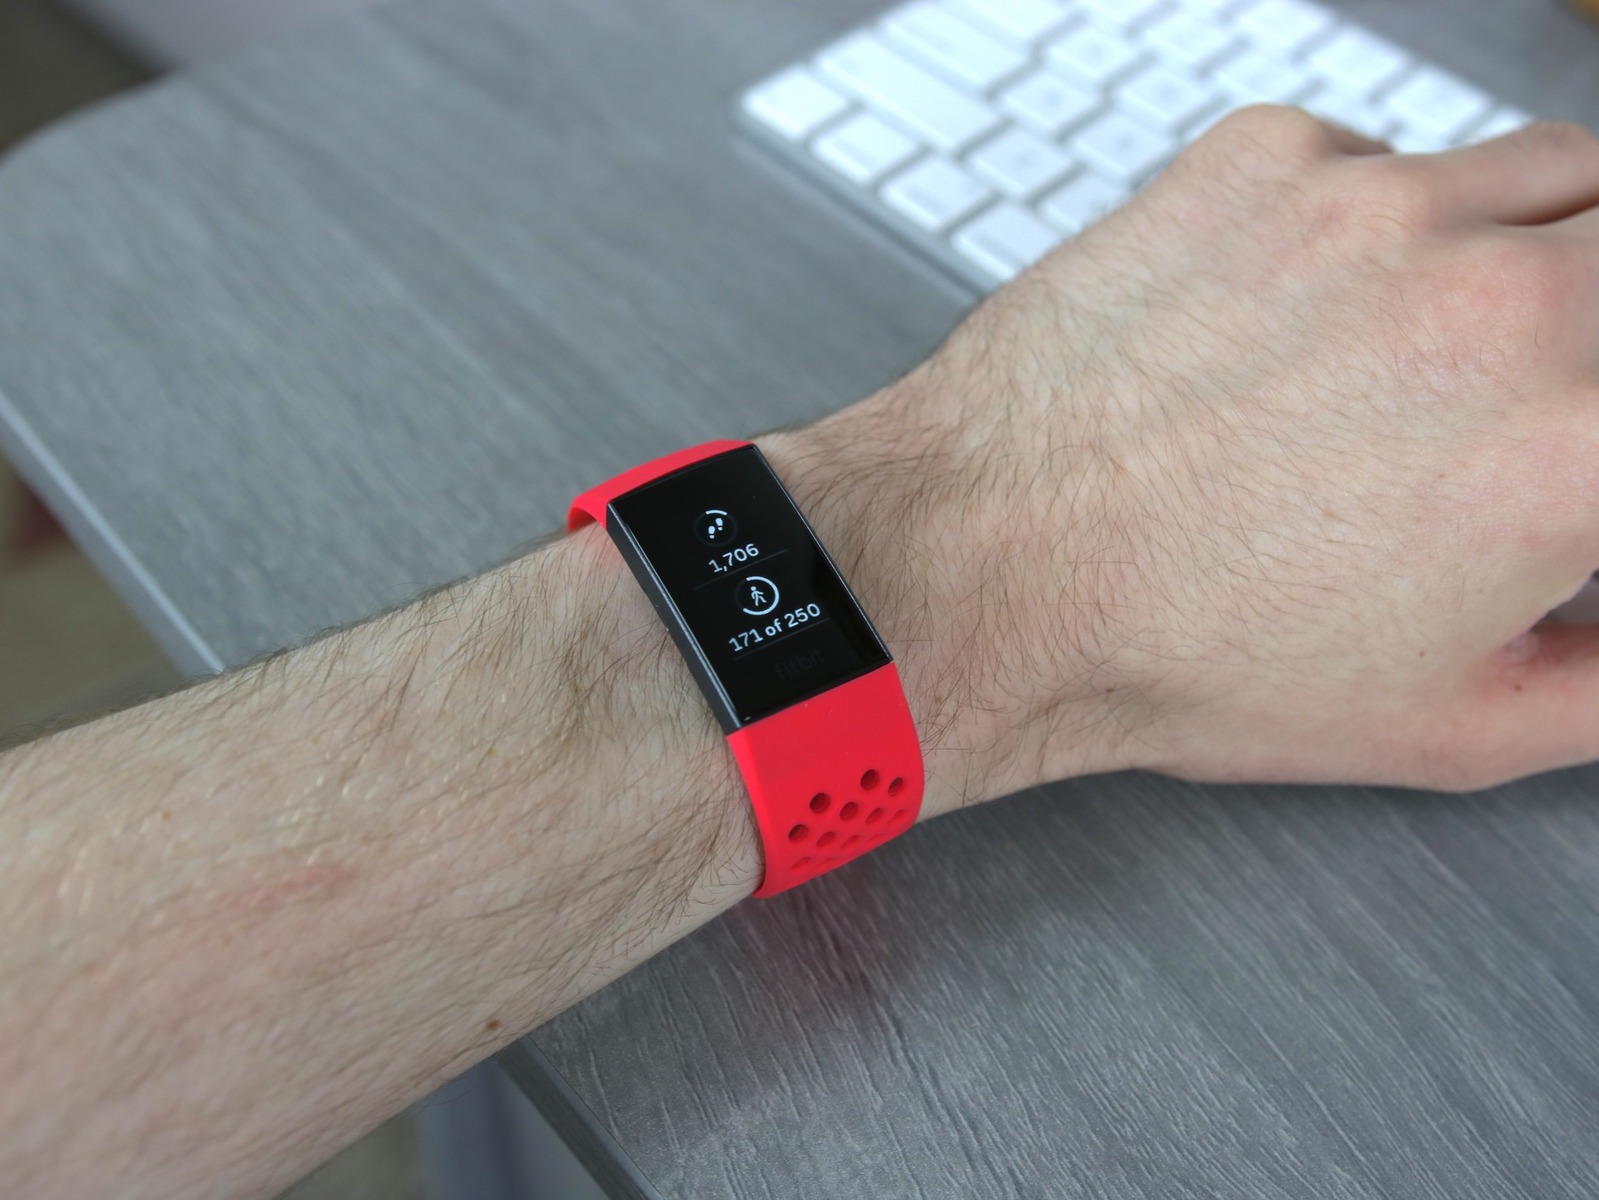 Band Replacement: Swapping The Band On Fitbit Charge